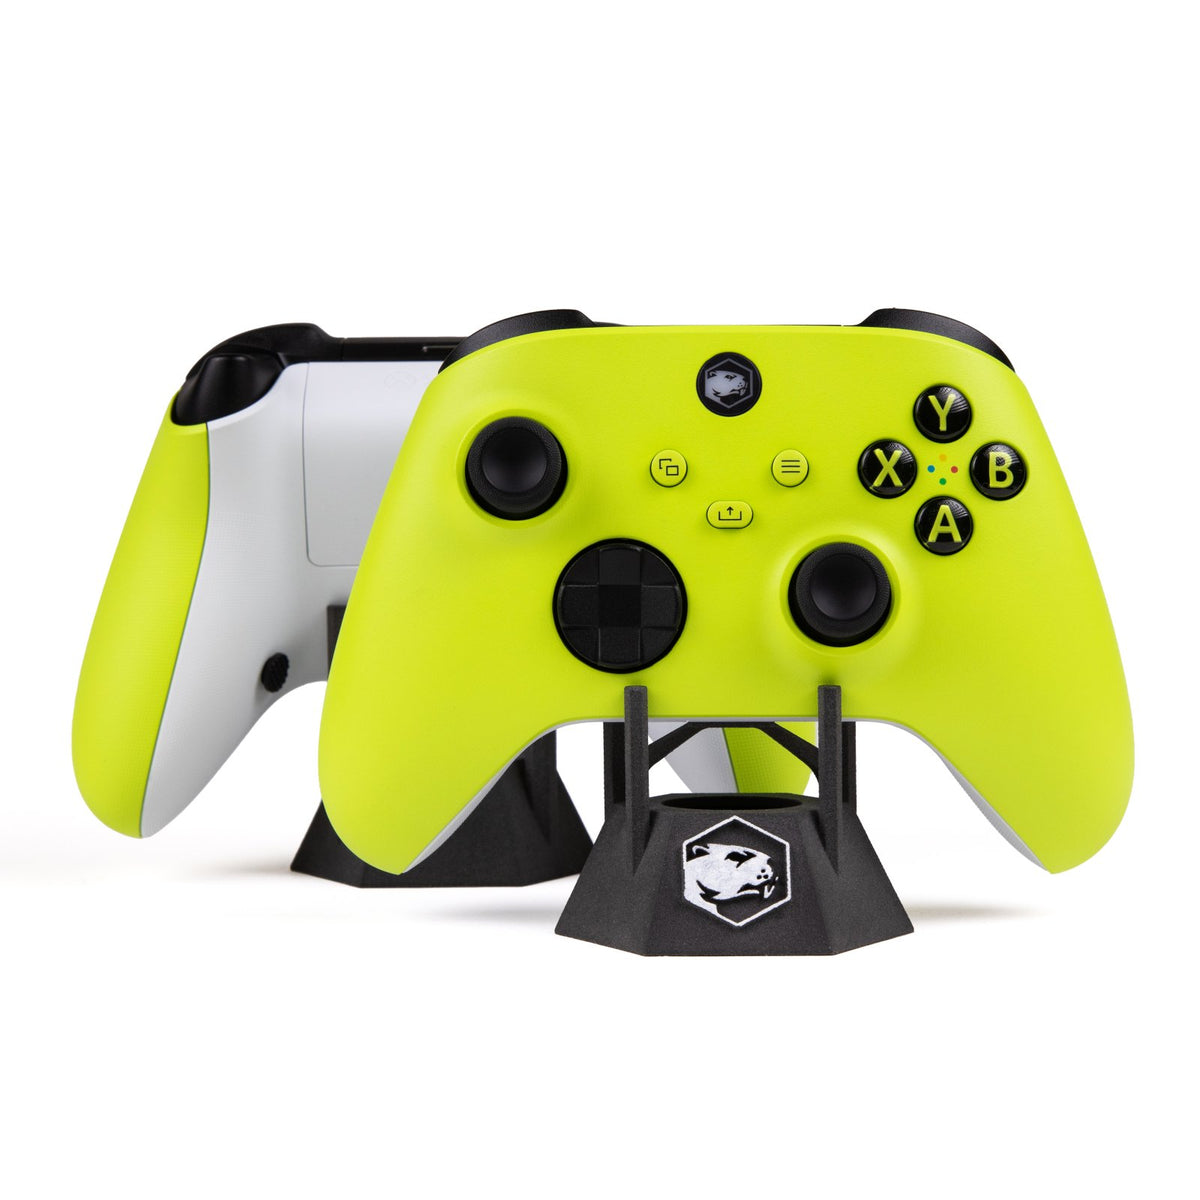 MANETTE XBOX SERIE X/S WIRELESS ELECTRIC VOLT